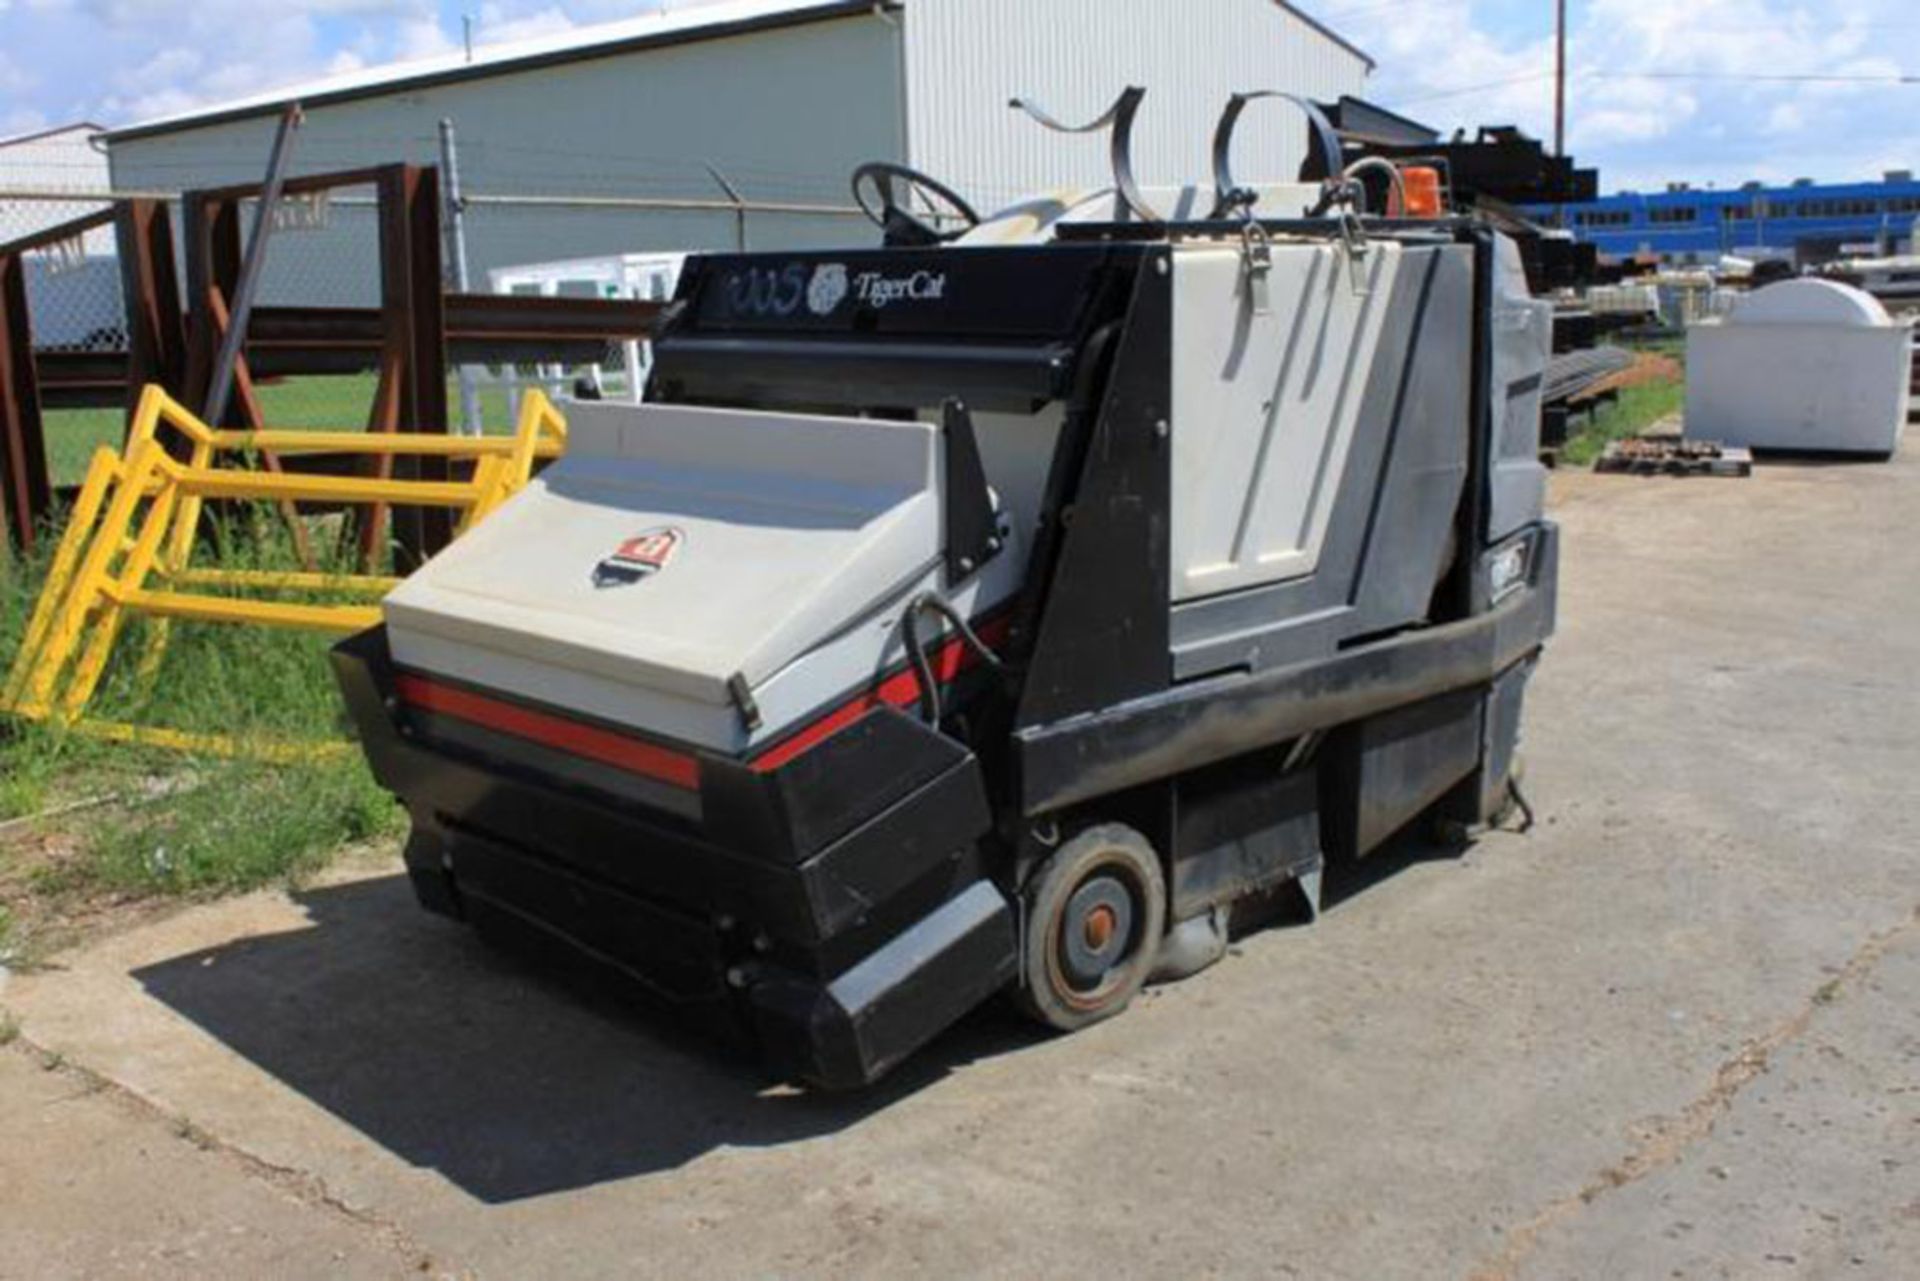 Advance Tiger Cat Sweeper, 60", Mdl: 462001 Tiger Cat, S/N: 465532 (7426P) (Located In